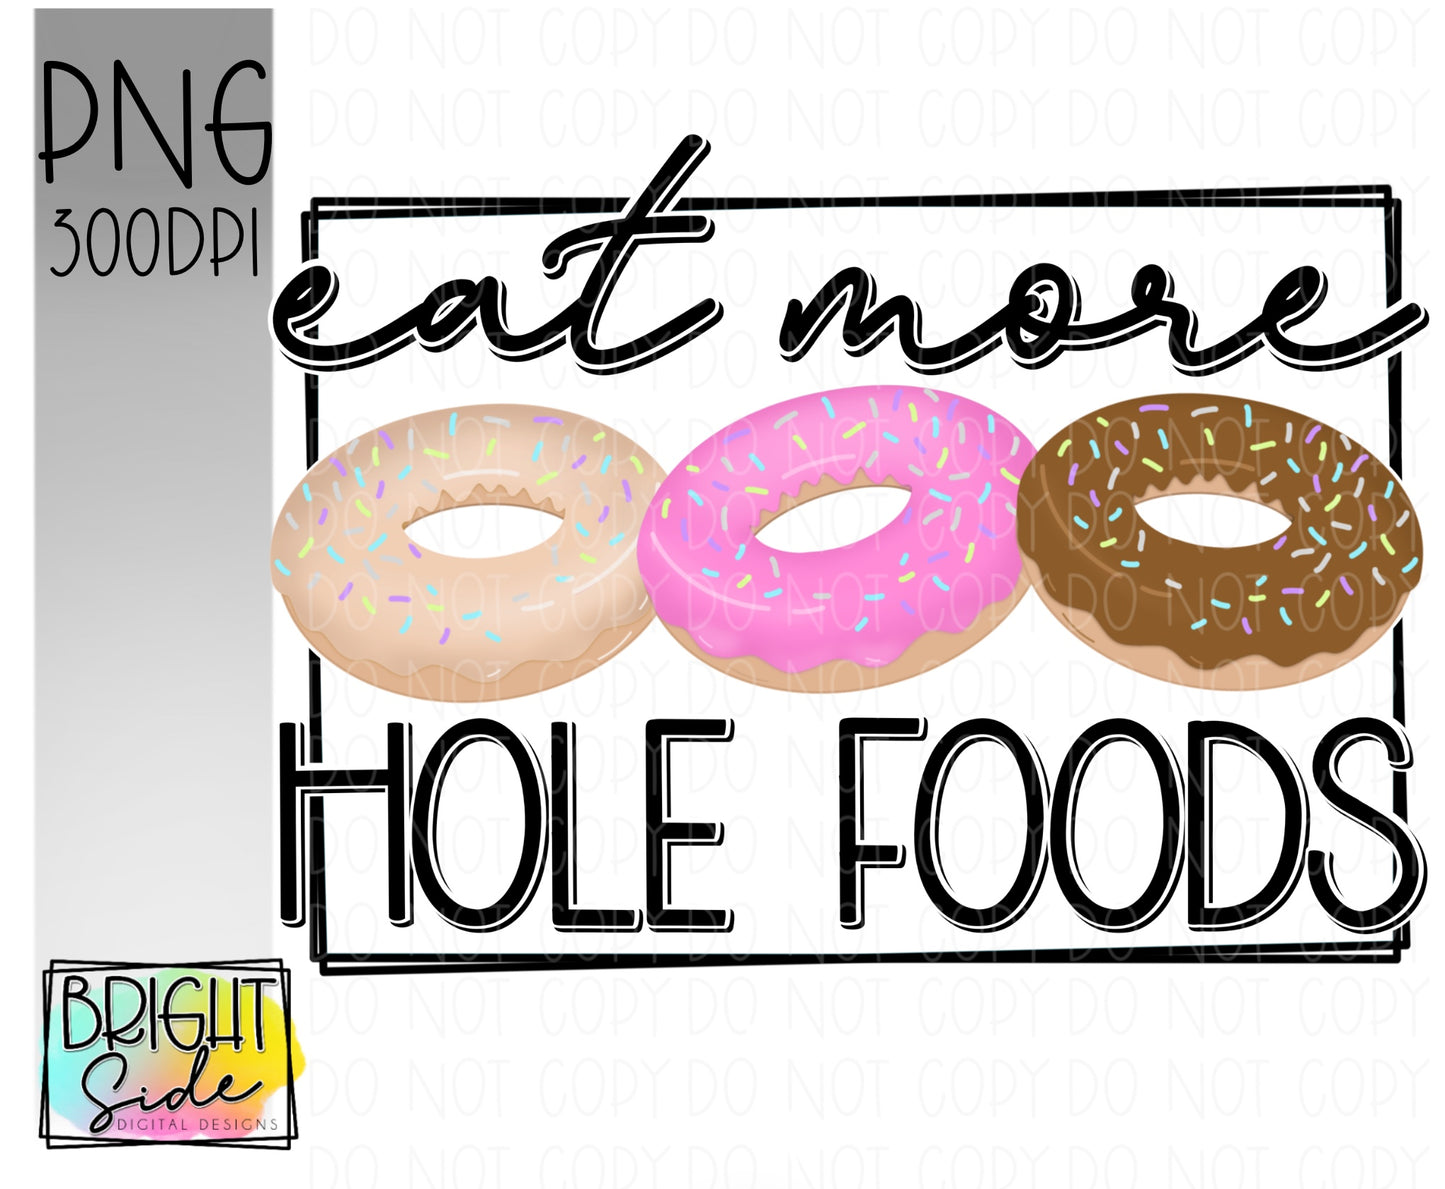 Eat More Hole Foods